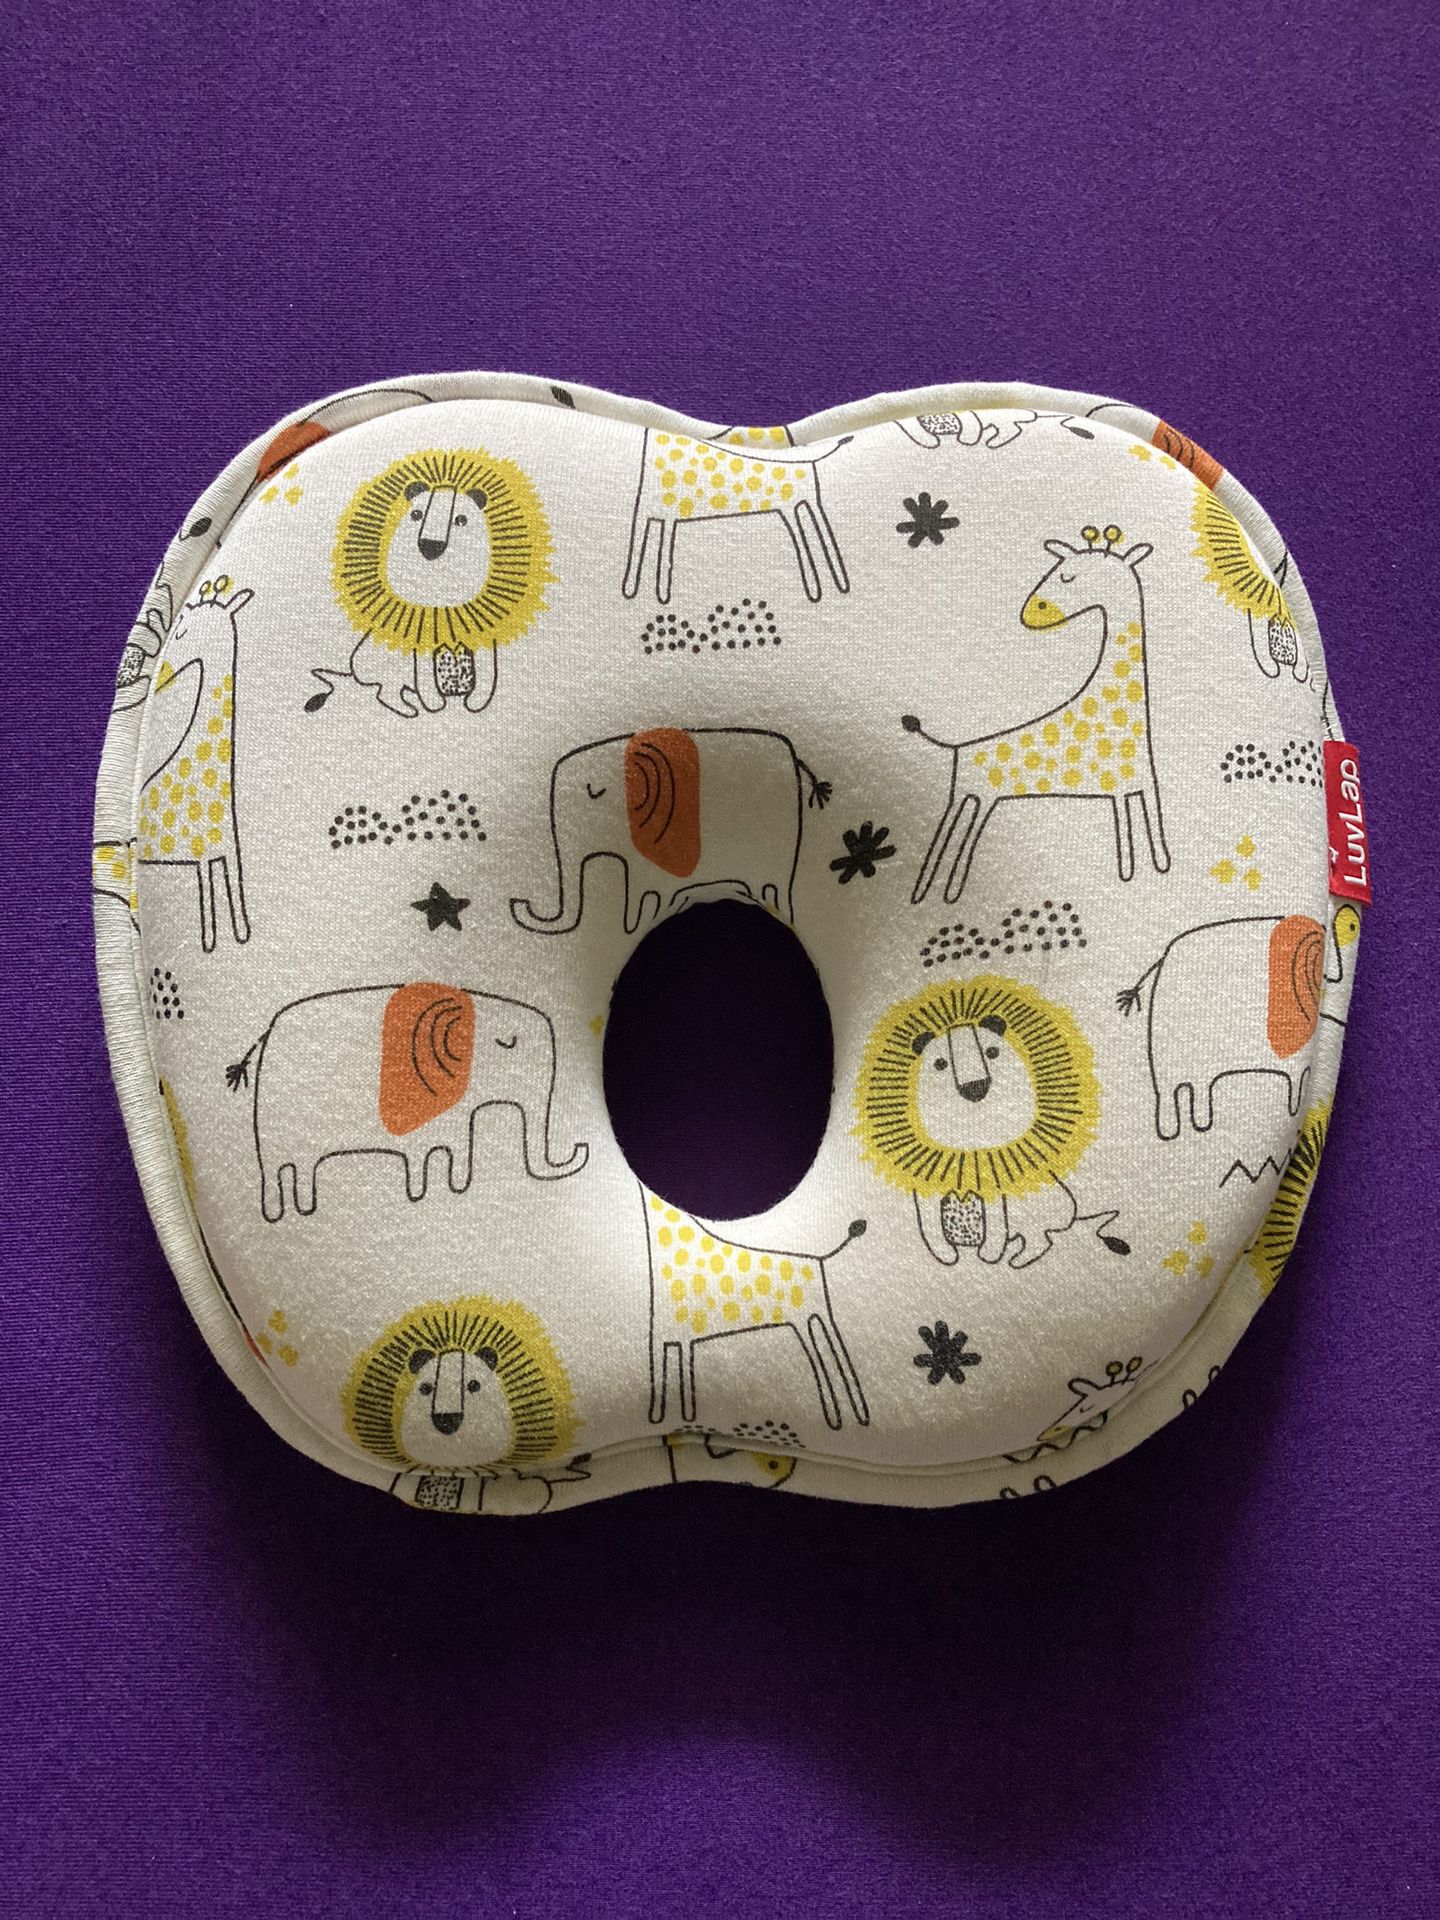 Baby Head Shaping Pillow 